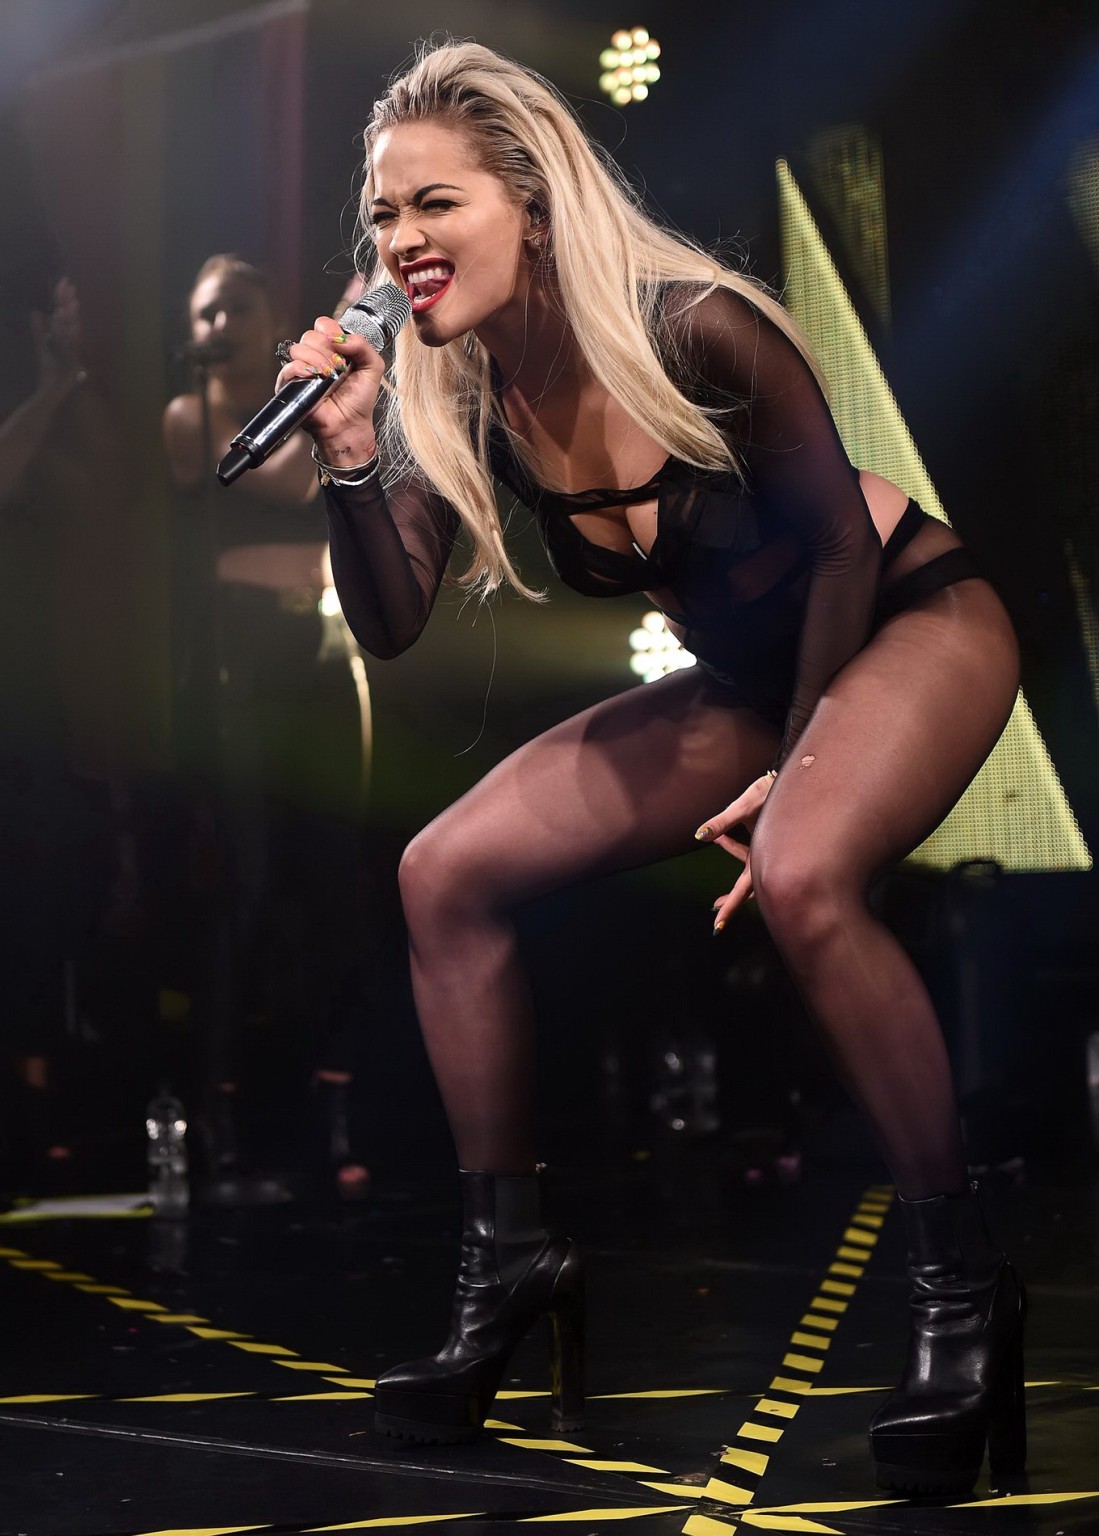 Rita Ora shows off her ass and cleavage in black bodysuit #75160178